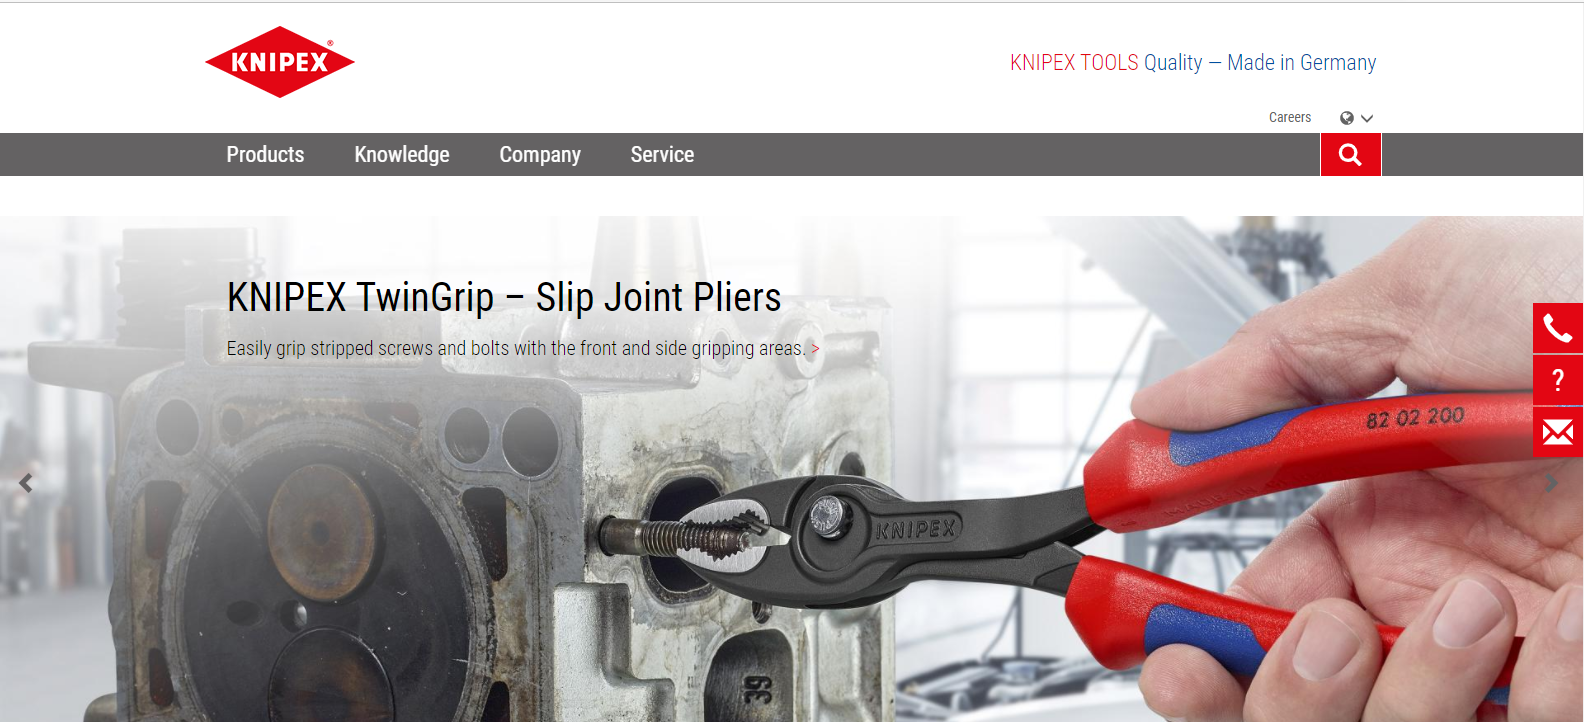 KNIPEX Tools Launches New Website THE SHOP